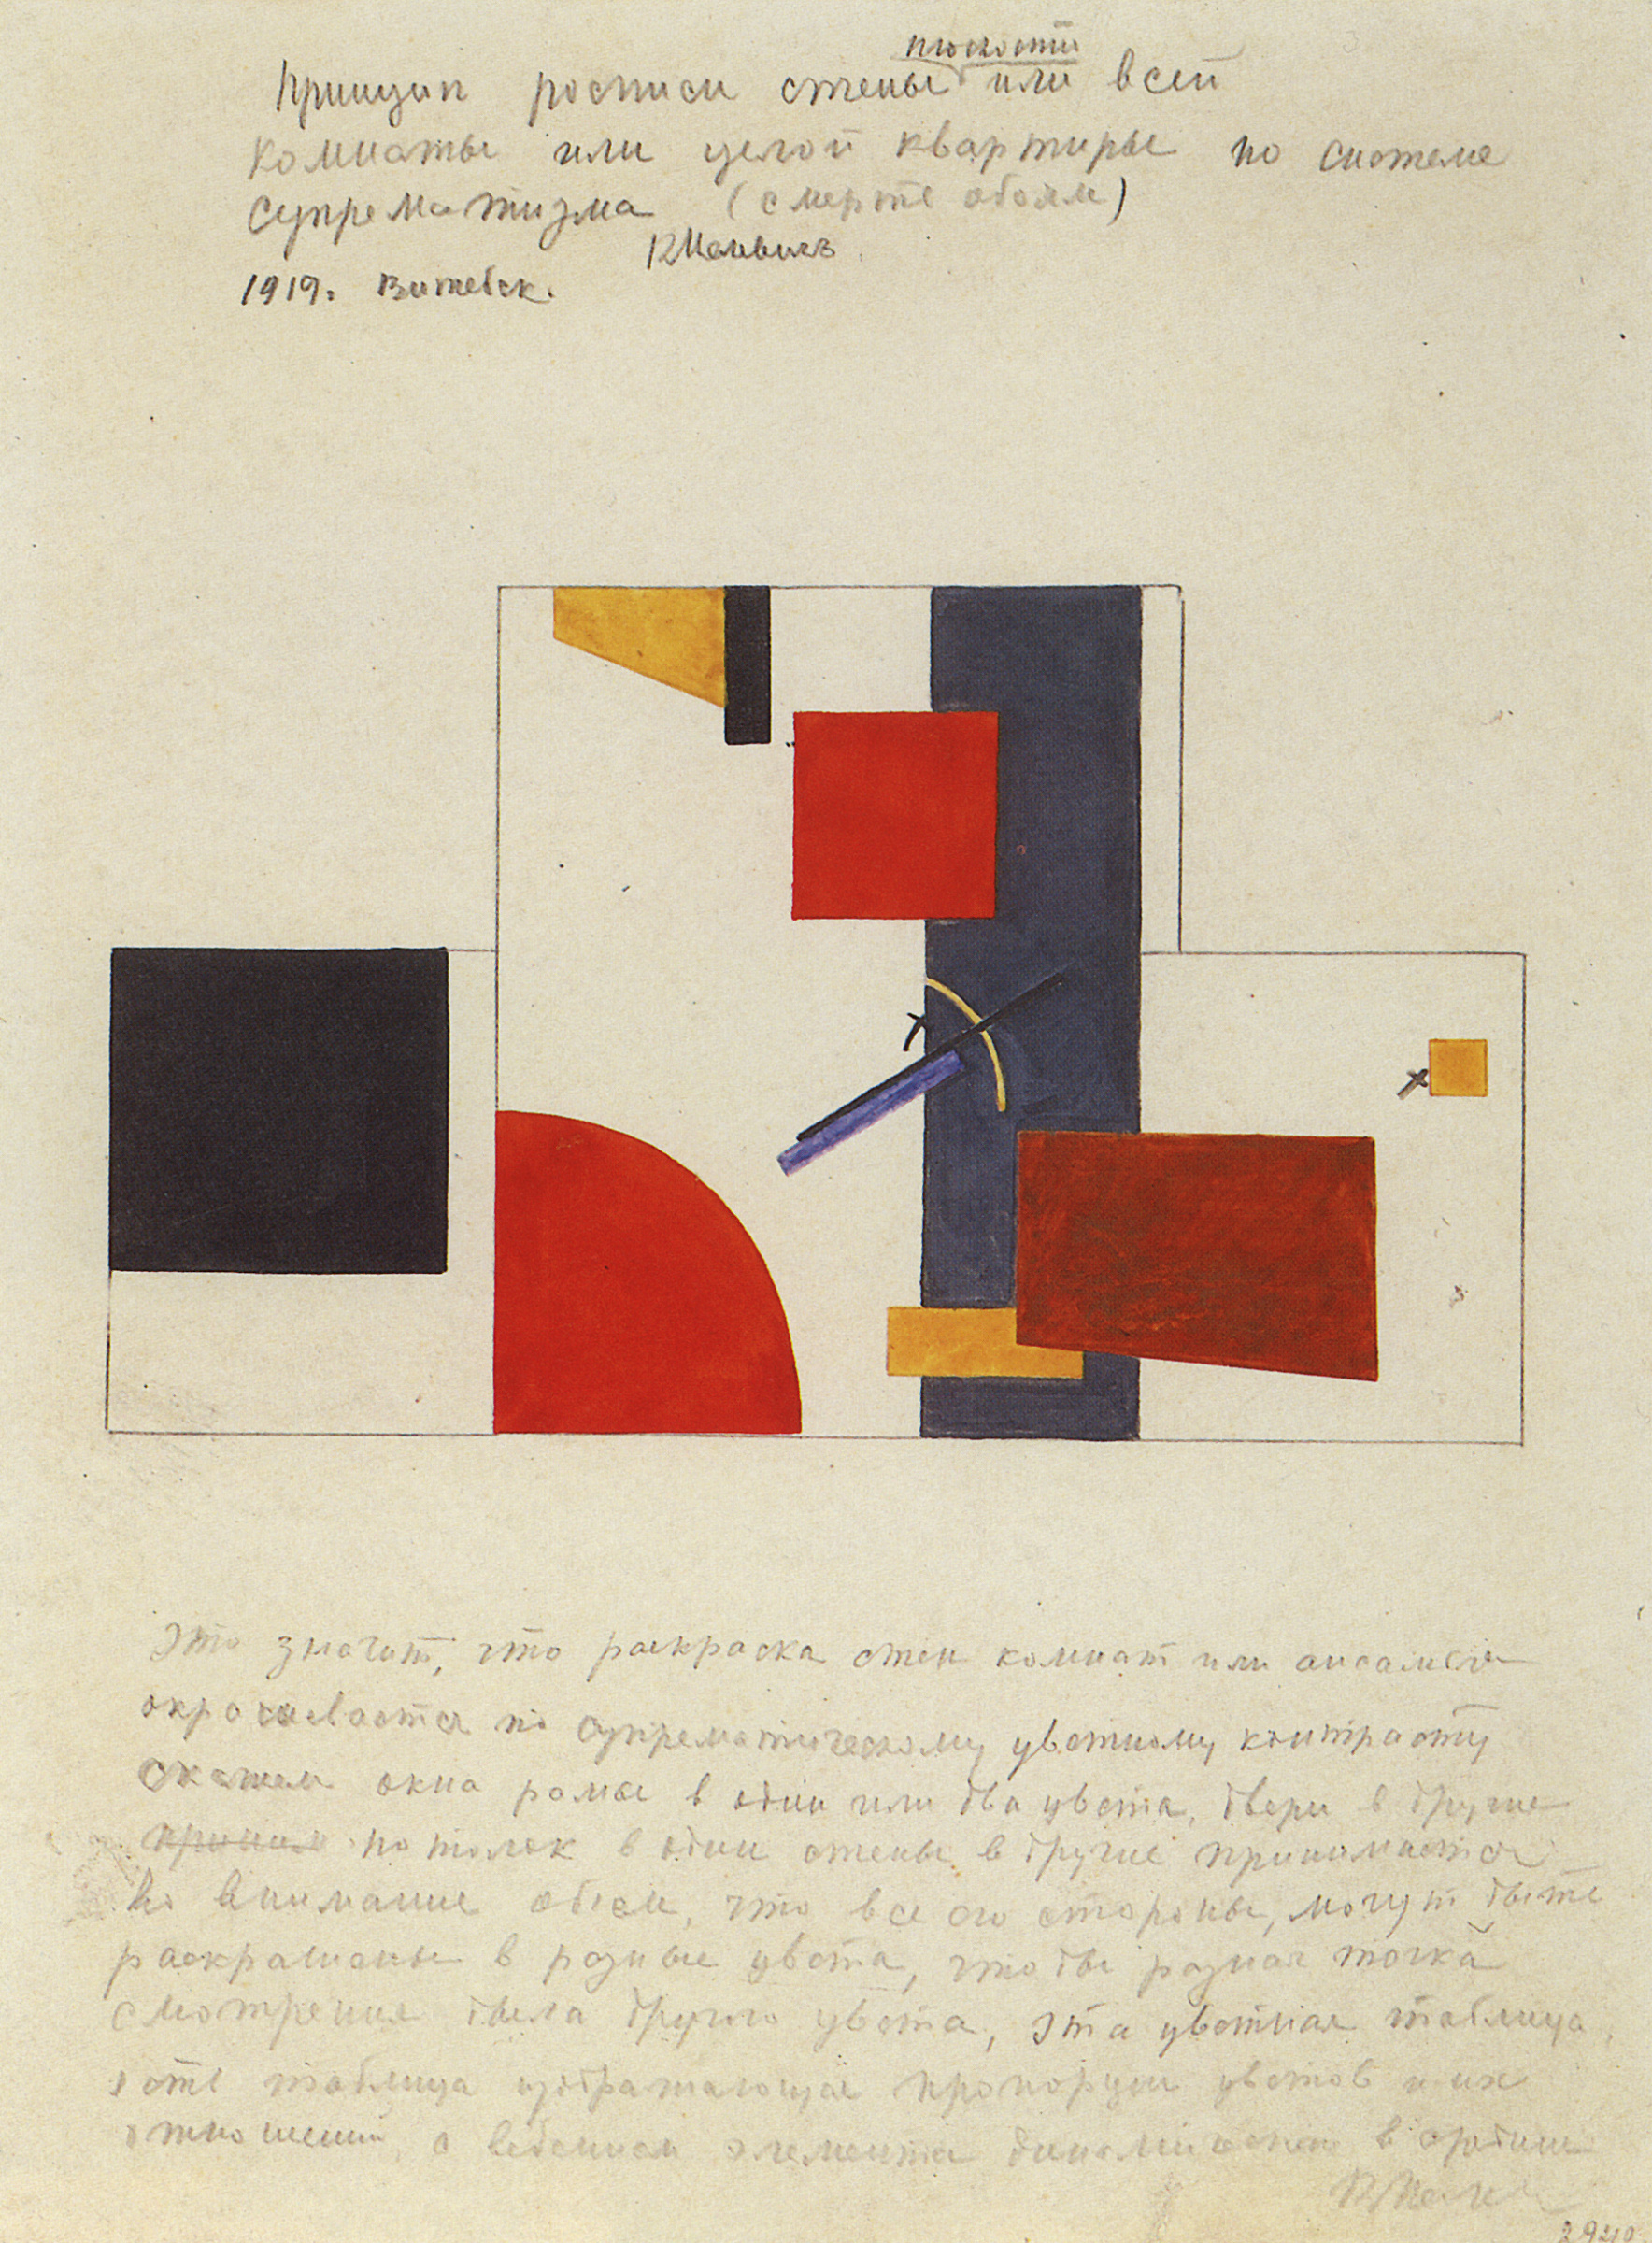 Buy digital version: The principle of painting the walls, surfaces or entire rooms, or entire apartments for the system of Suprematism (death to the Wallpaper)